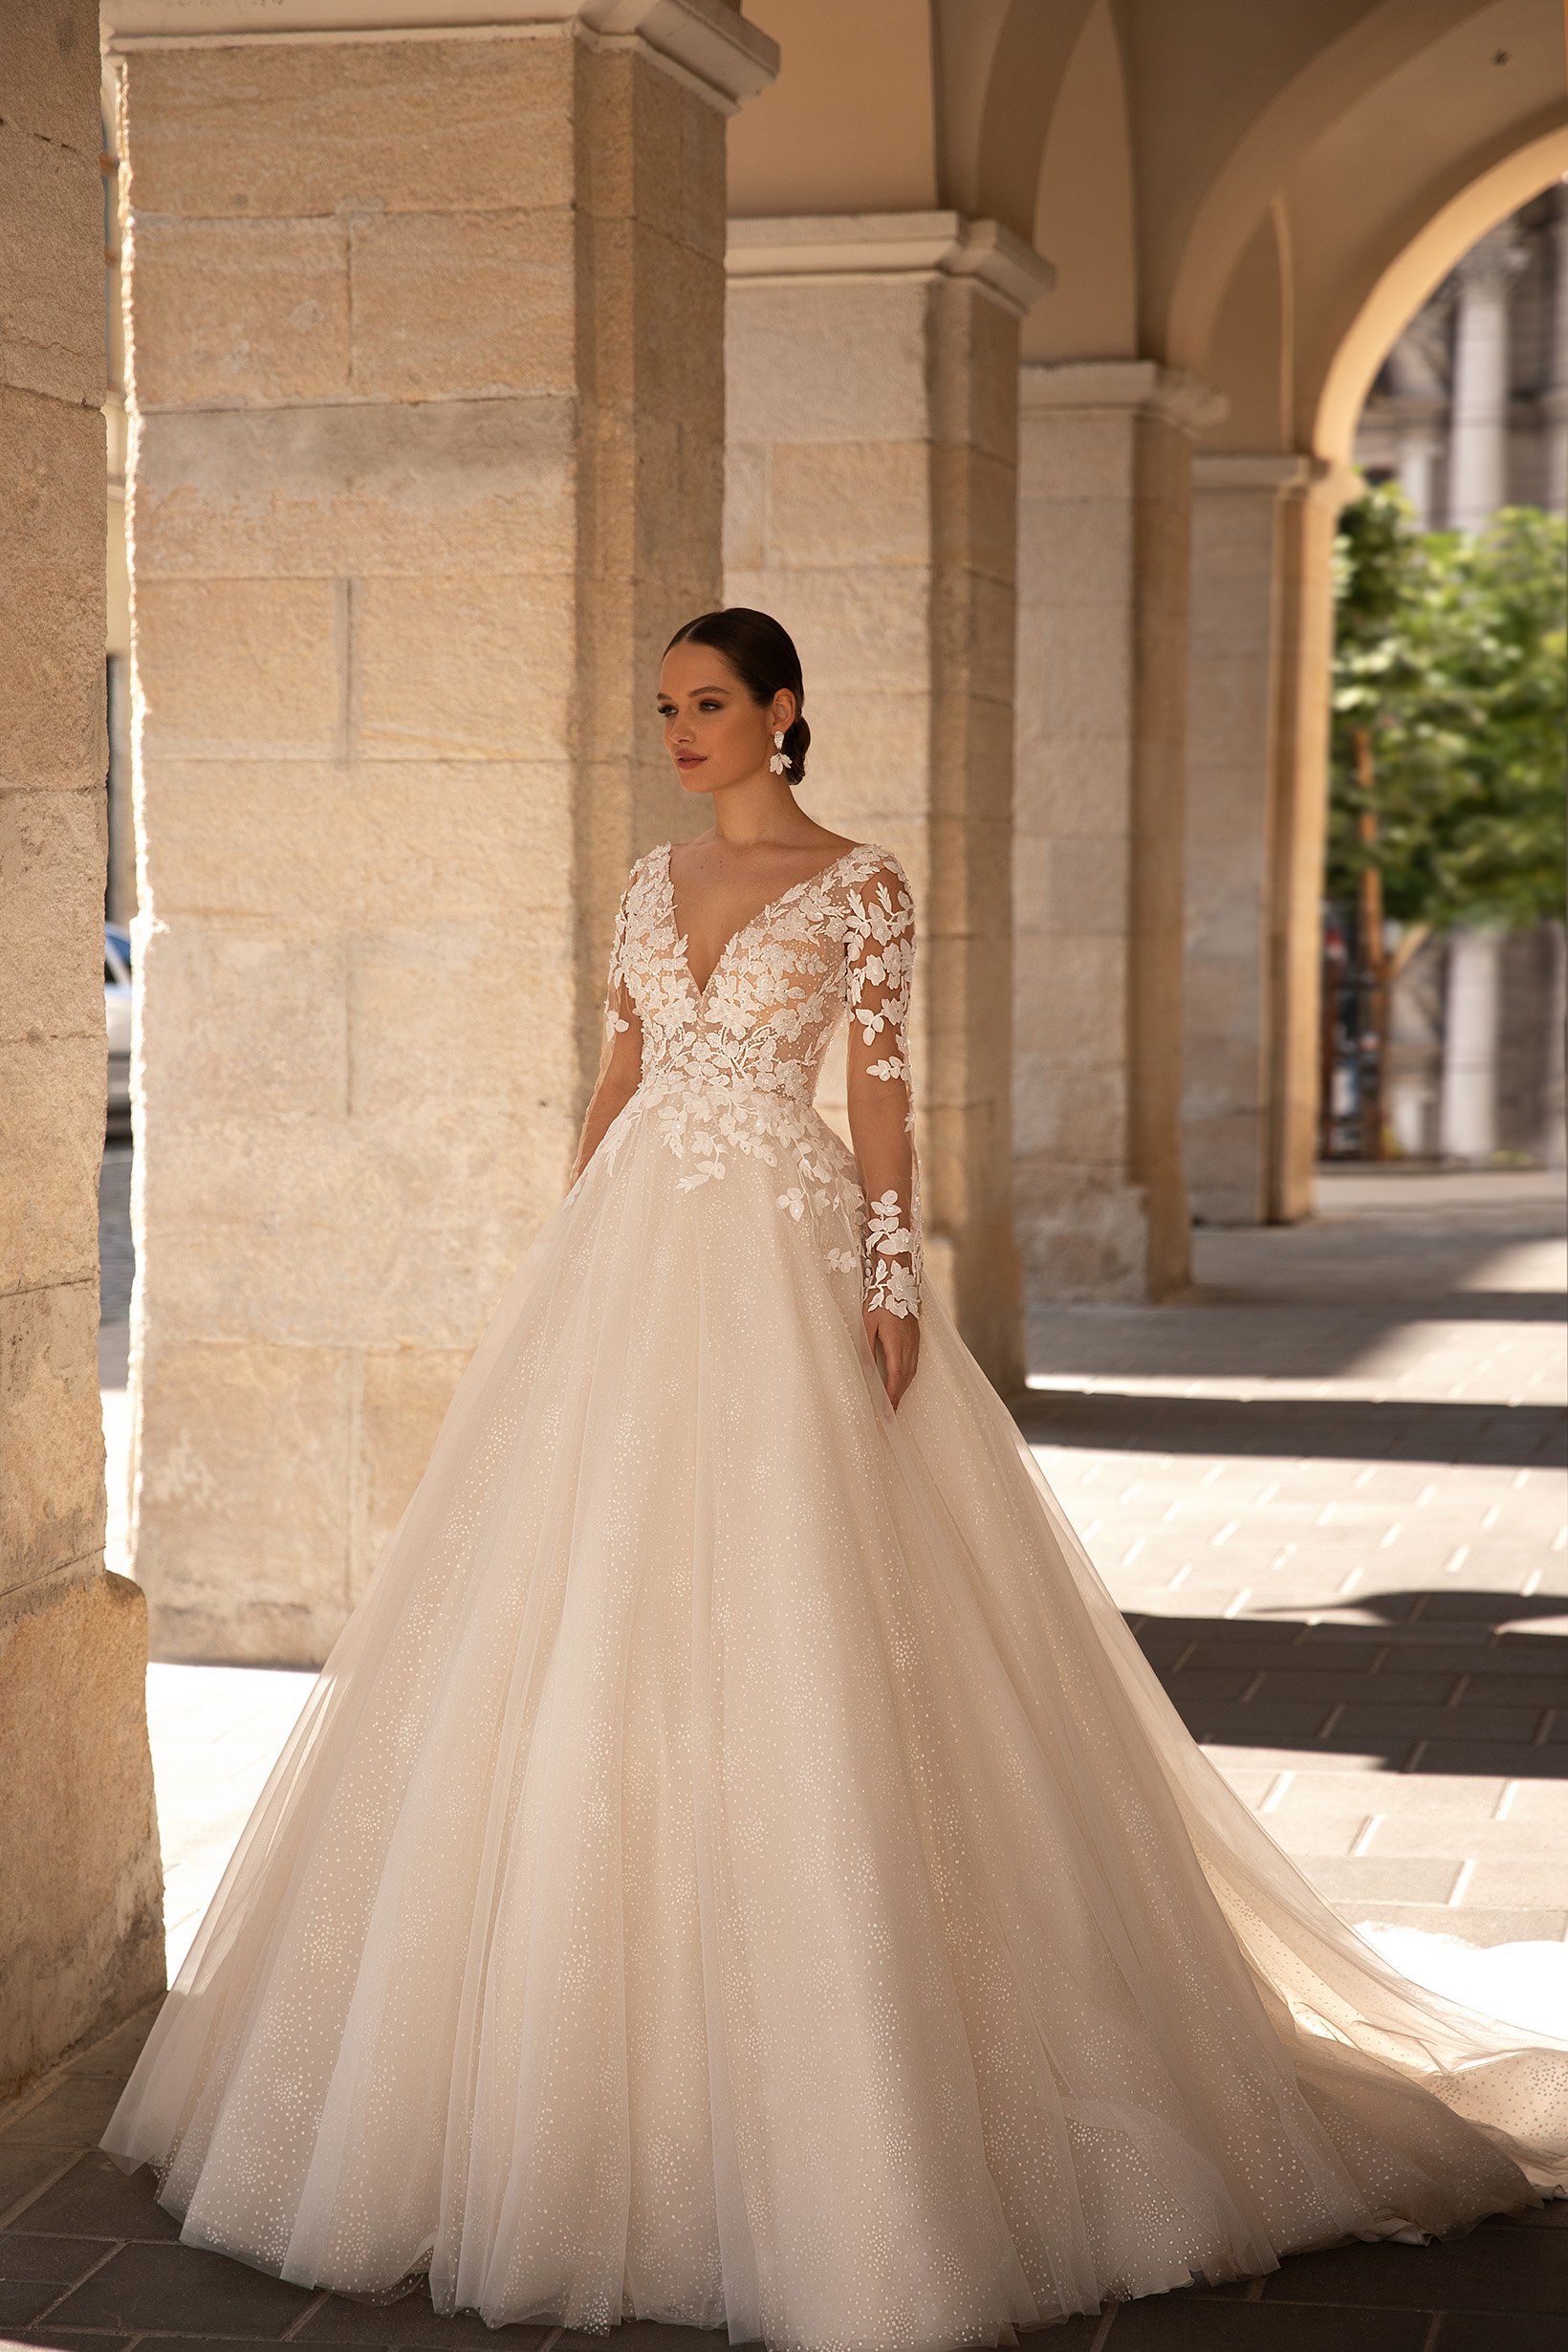 Wedding dress Fiorella Product for Sale at NY City Bride